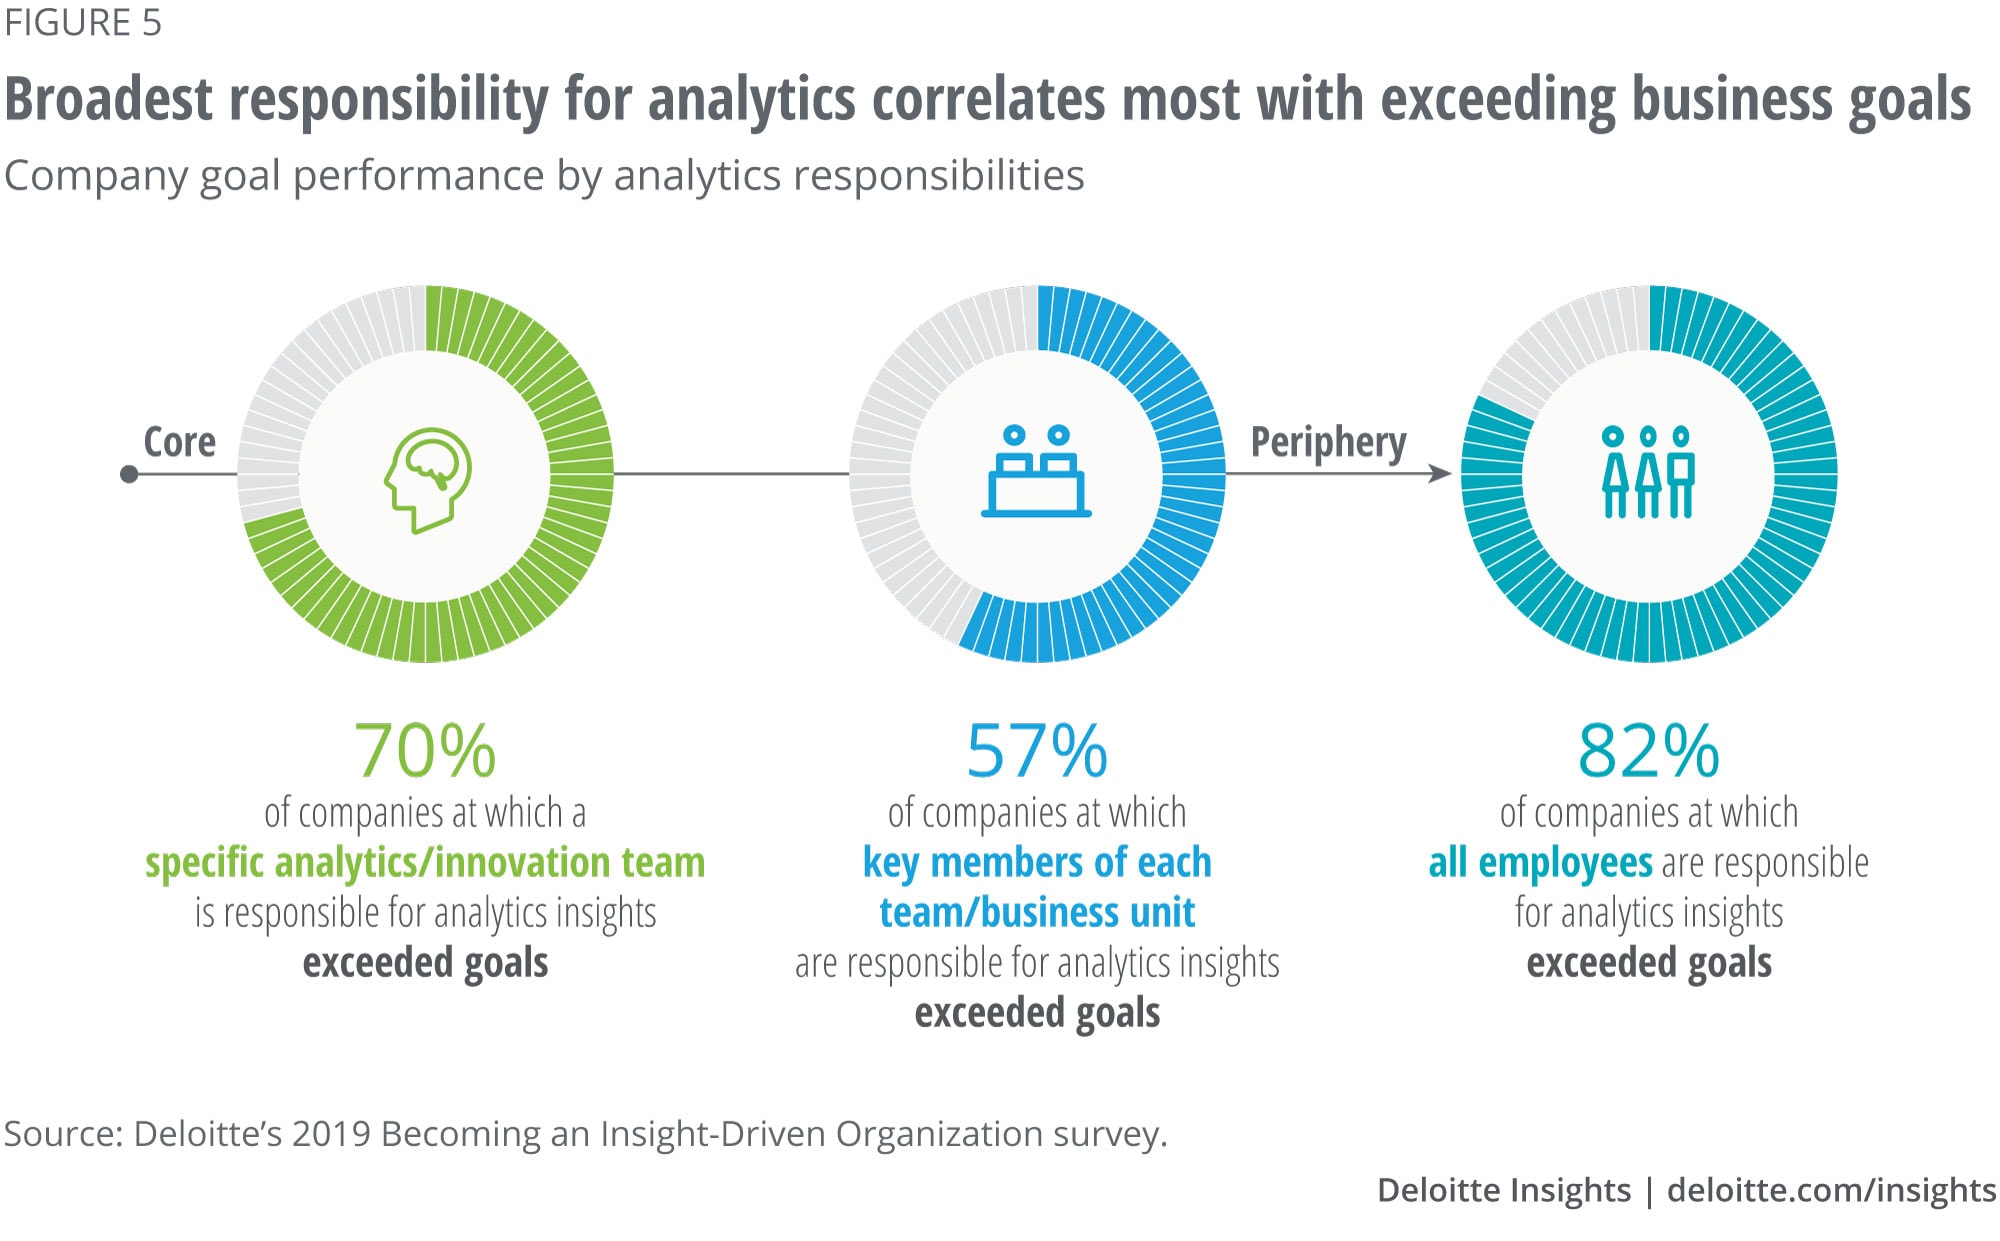 Broadest responsibility for analytics correlates most with exceeding business goals